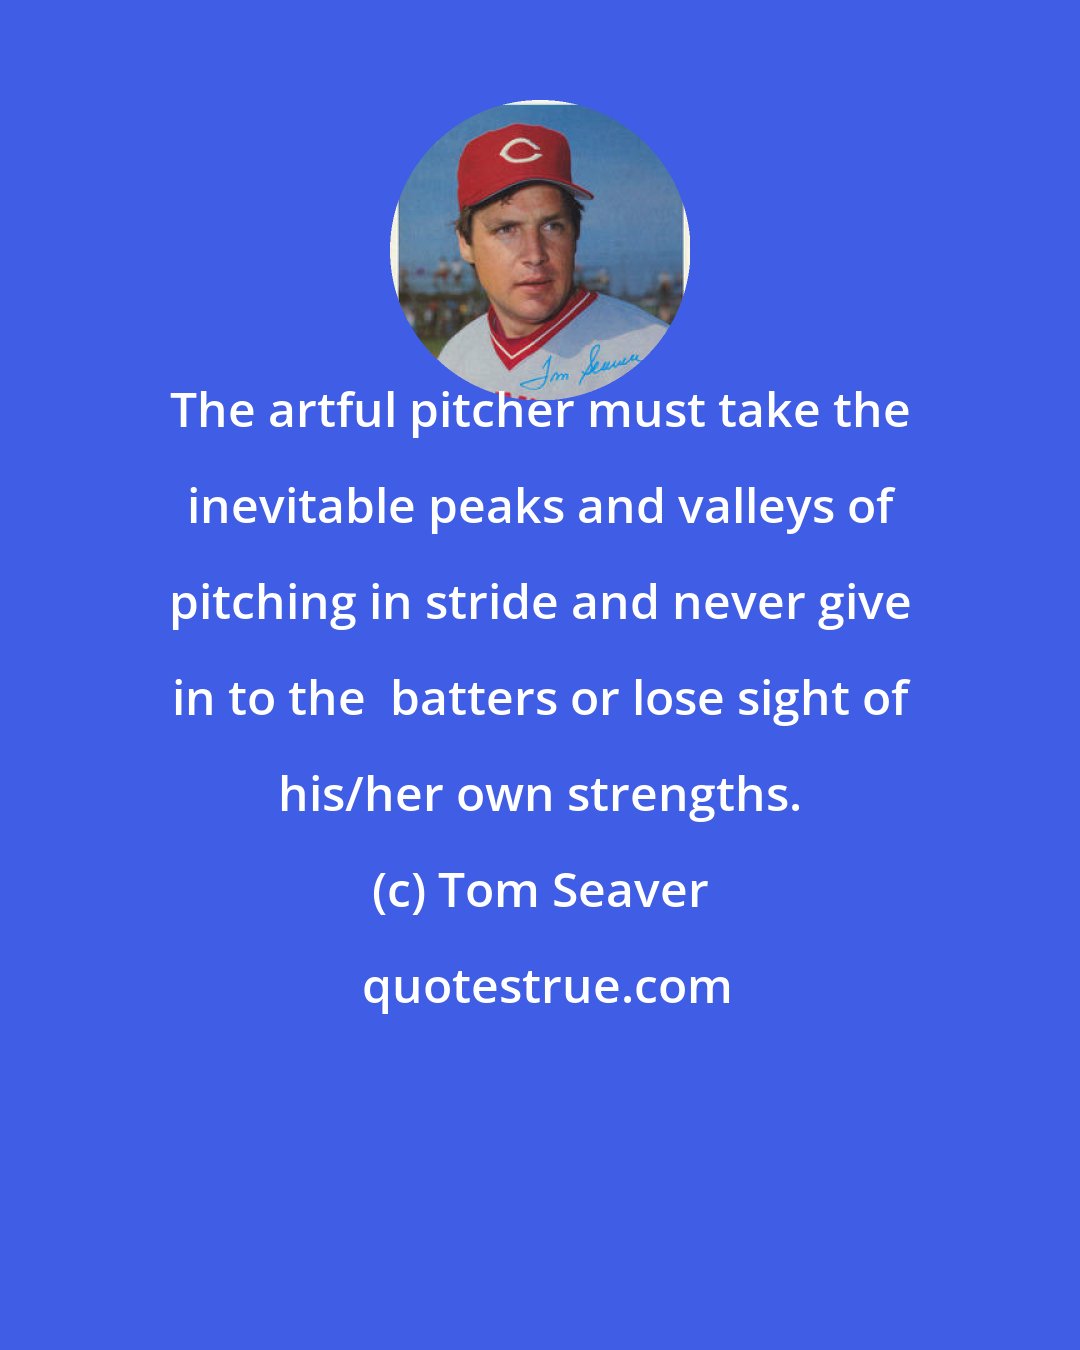 Tom Seaver: The artful pitcher must take the inevitable peaks and valleys of pitching in stride and never give in to the  batters or lose sight of his/her own strengths.